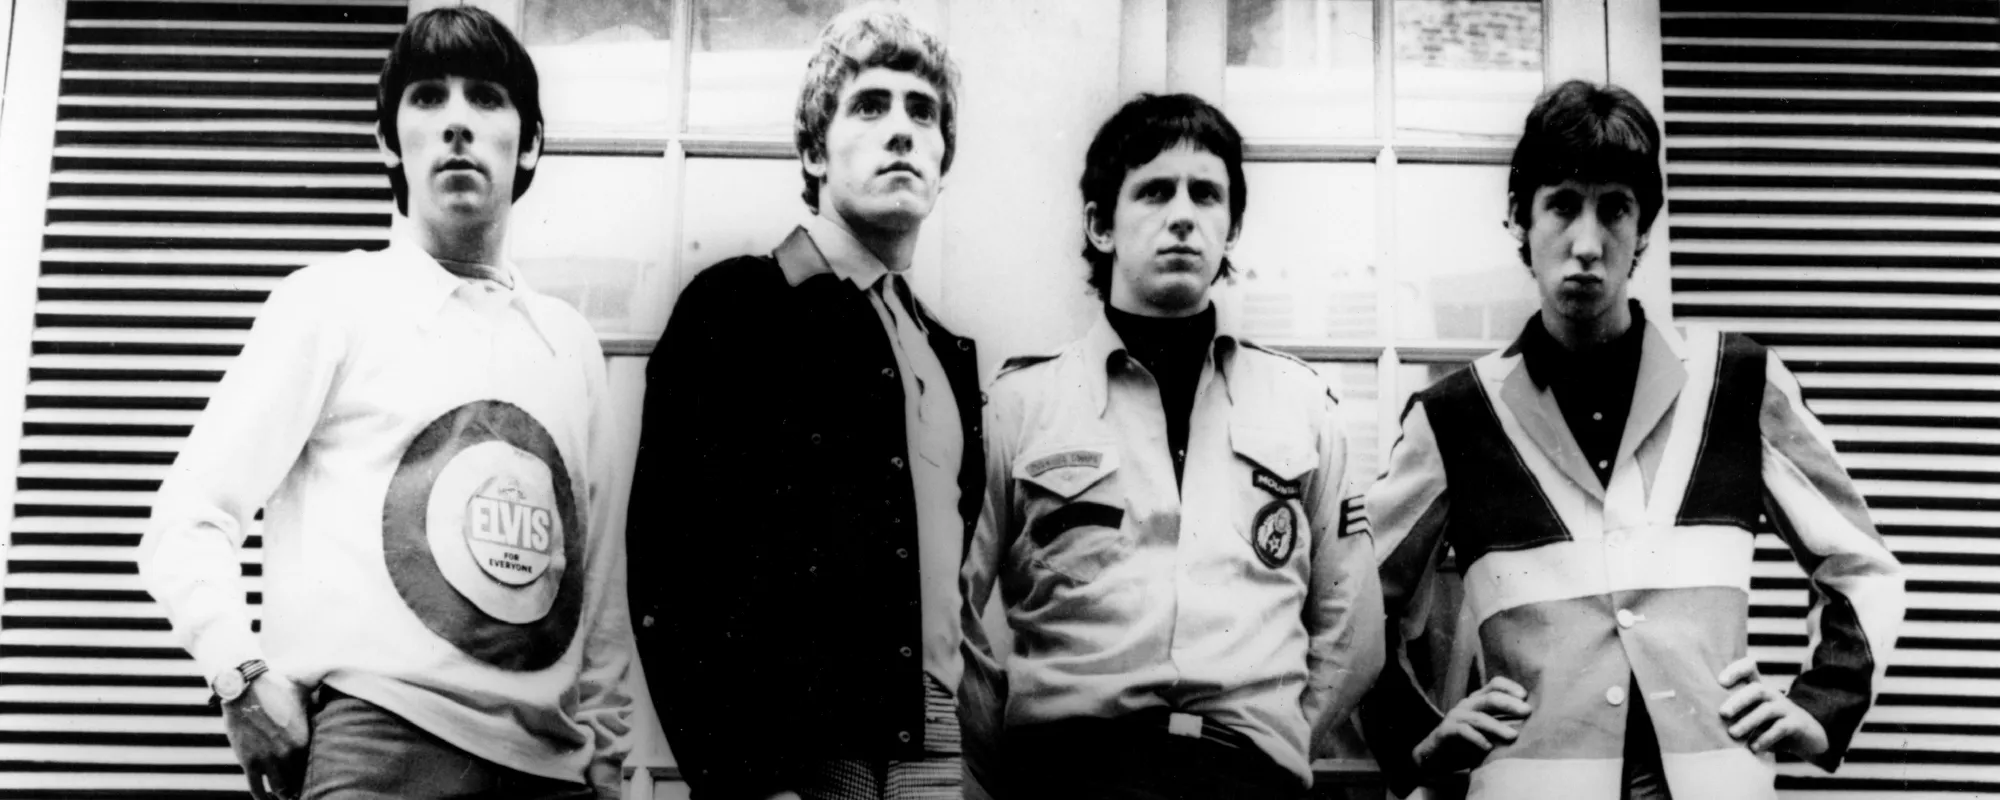 A Love Song of Frustration: The Story Behind “I Can’t Explain” by The Who